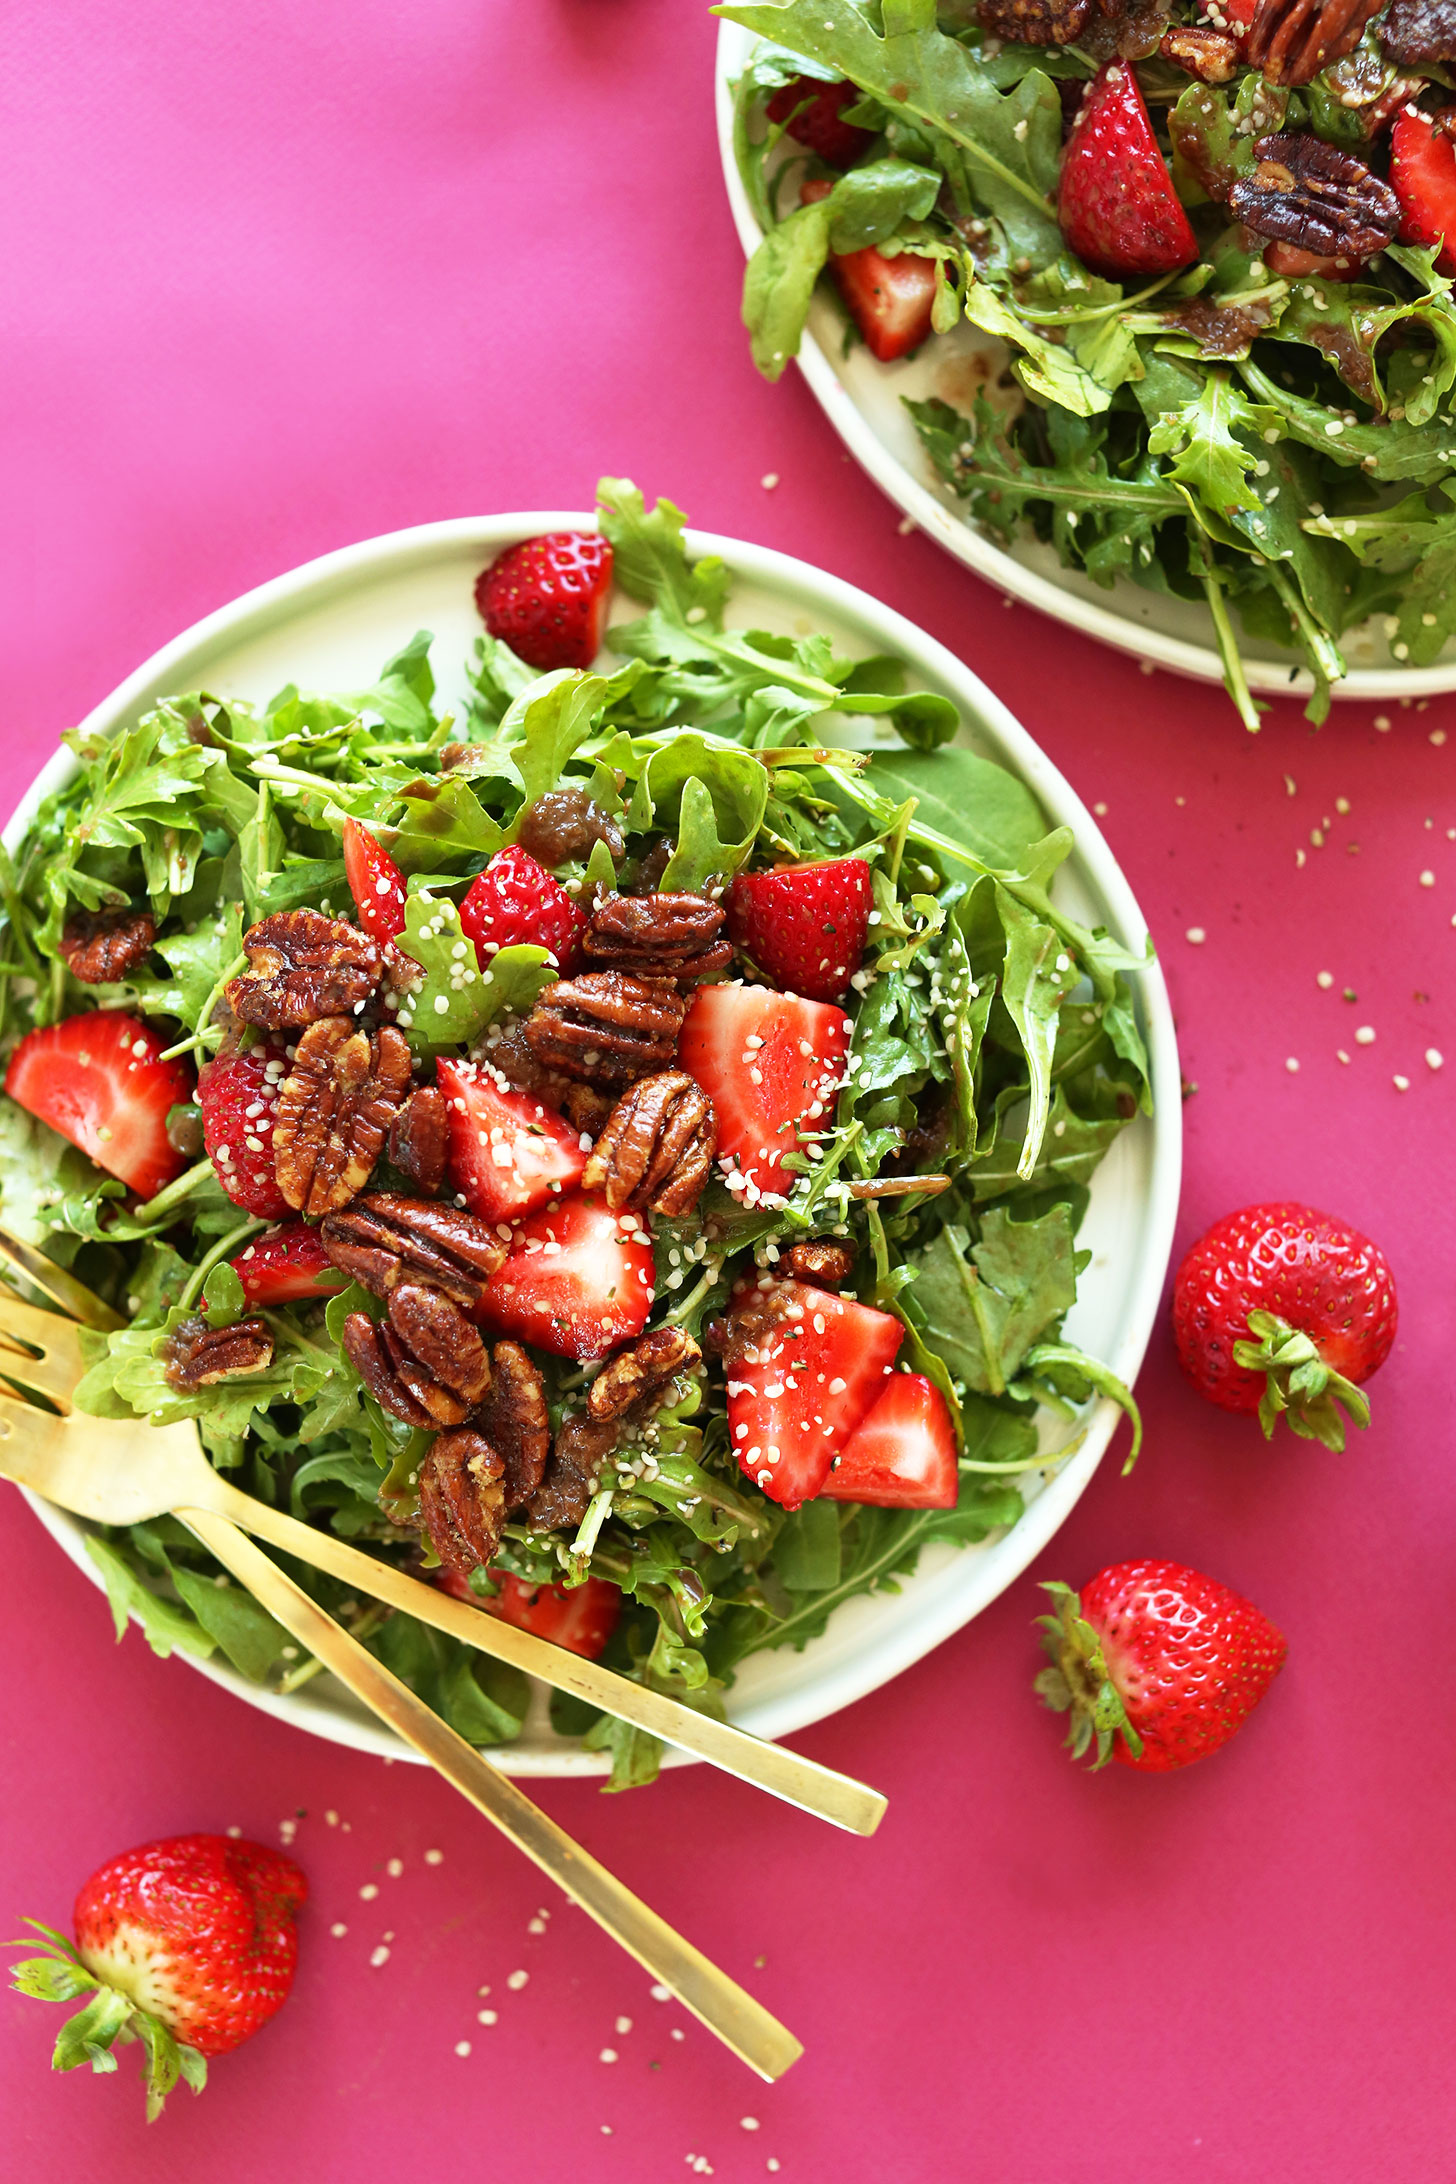 Big plate filled with Strawberry Arugula Salad with Brown Sugar Pecans and a Warm Shallot Vinaigrette